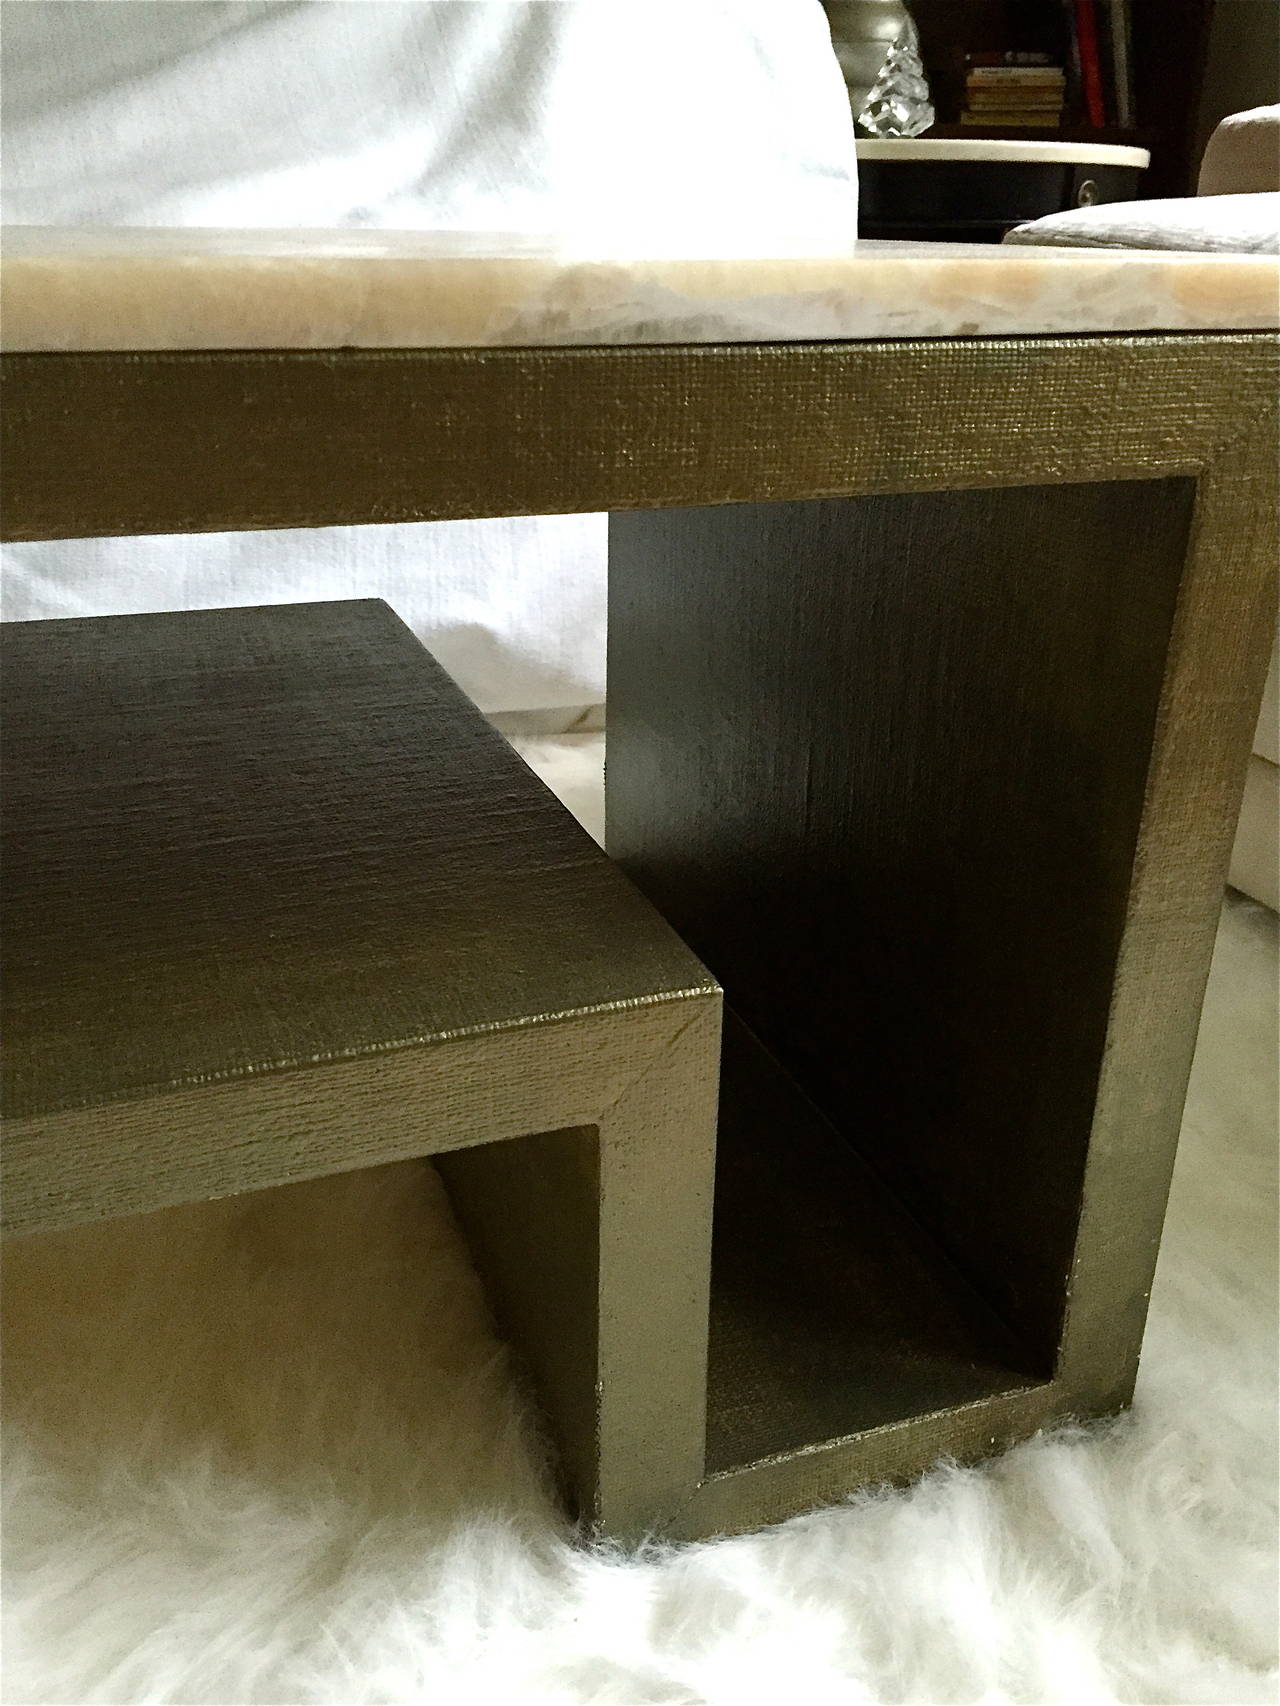 This coffee or cocktail table is linen-wrapped and painted in a moss green with a faint metallic finish. It has a highly figured onyx top. The base is wood, which is wrapped in linen. It measures 44